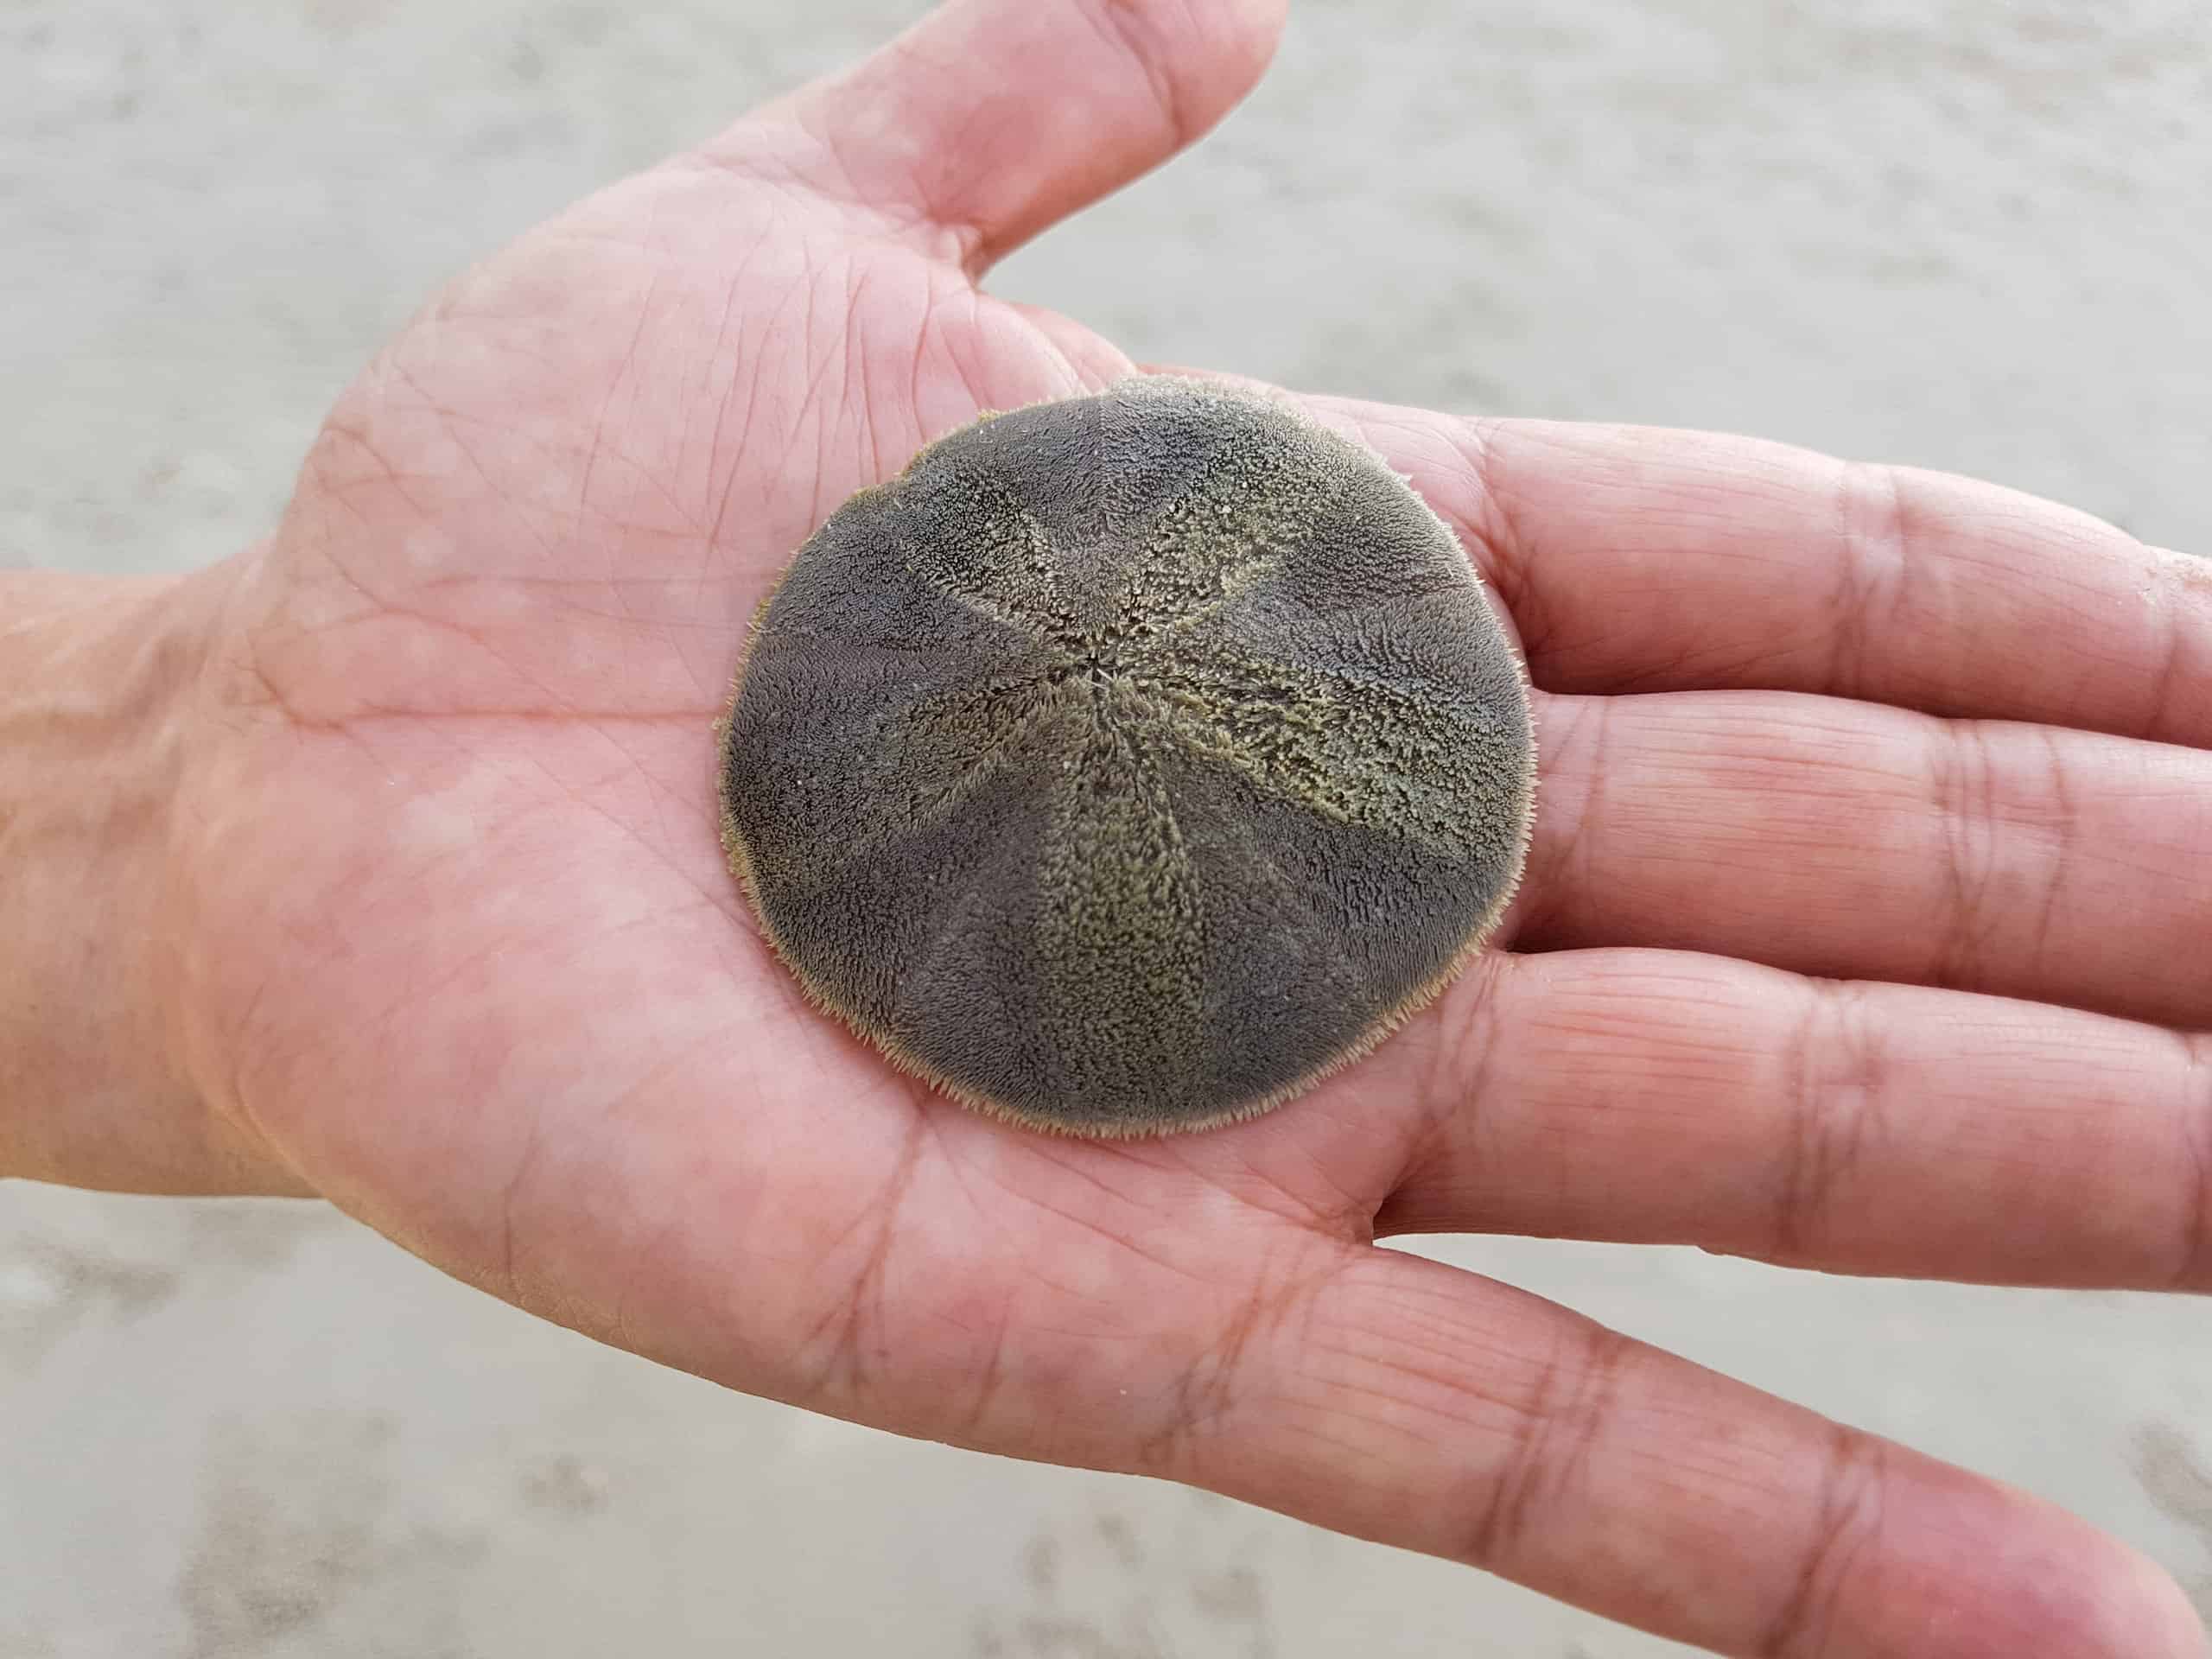 Why are there so many sand dollars on Ocean Beach?